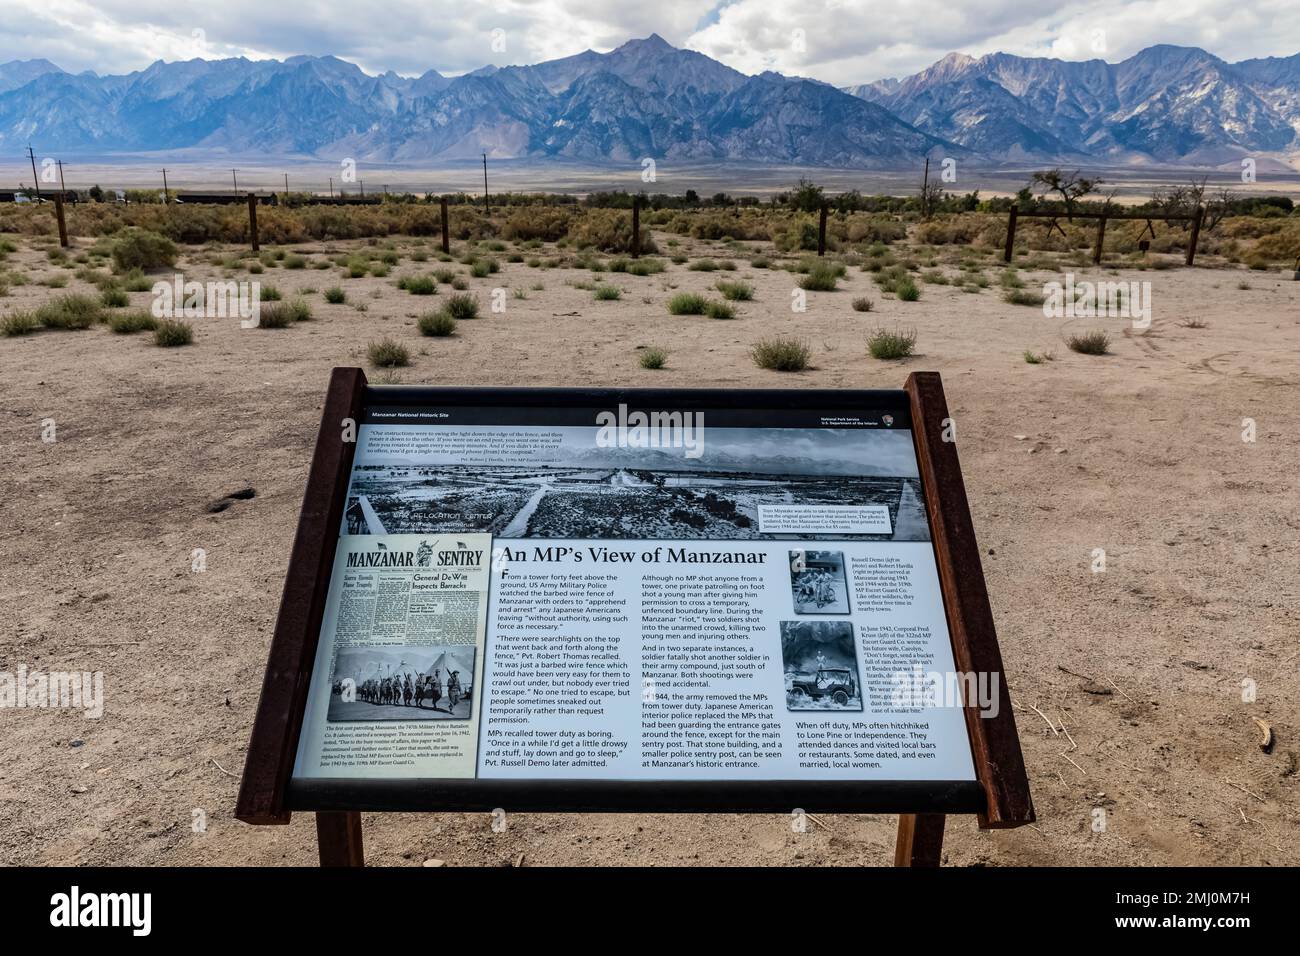 Interpretive sign about guard tower in the Japanese American concentration camp, preserved in Manzanar National Historic Site, California, USA Stock Photo